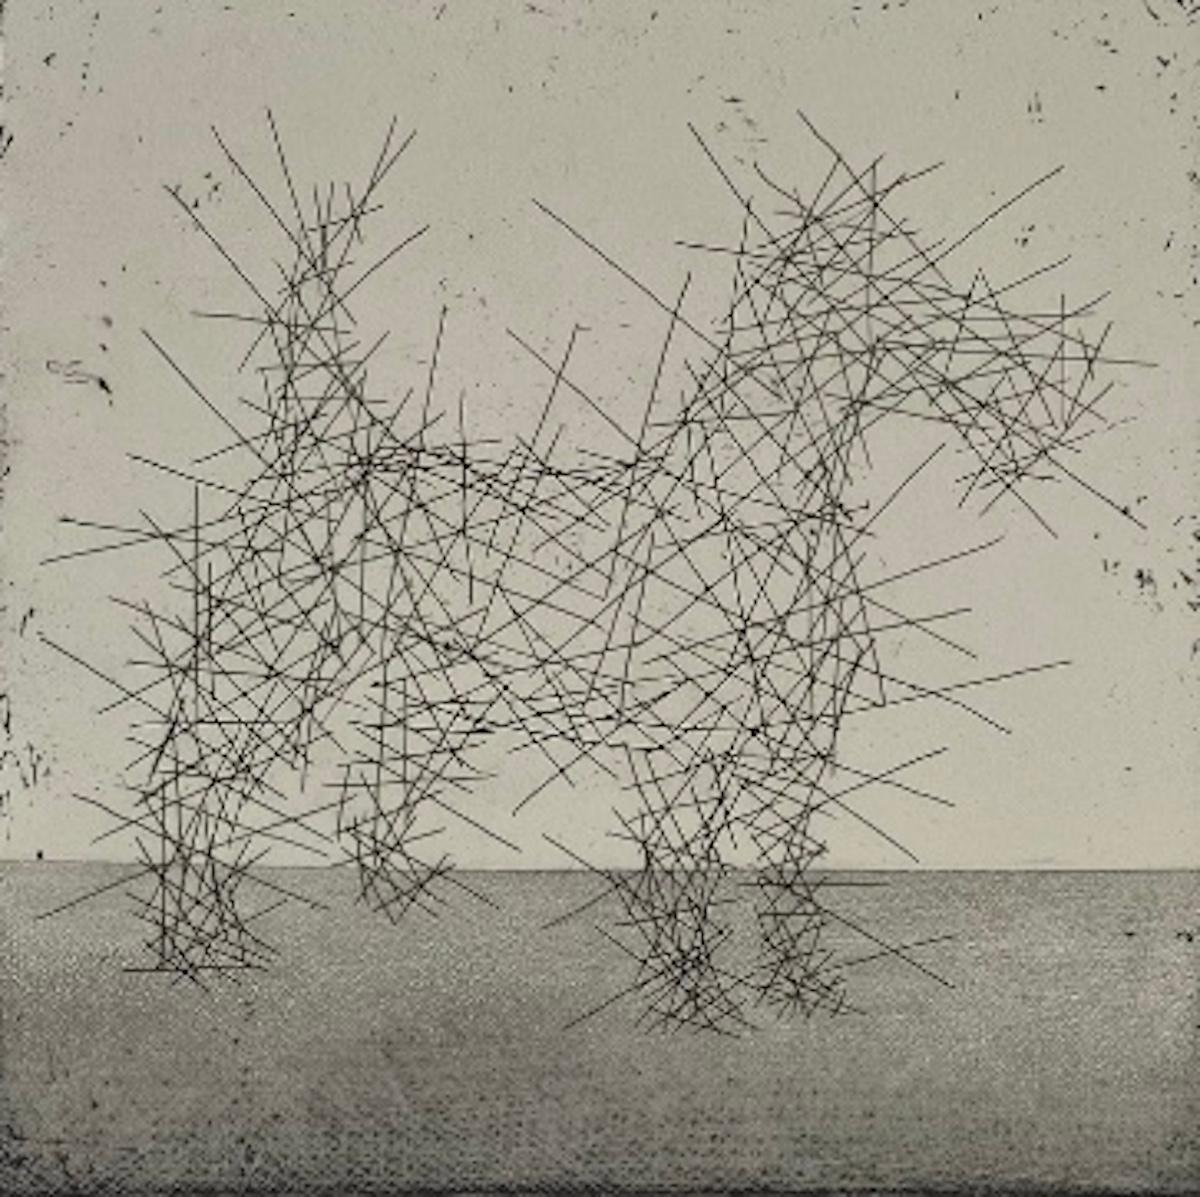 Gormley's Dog II, Contemporary Animal Art, Limited Edition Print, Etching of Dog